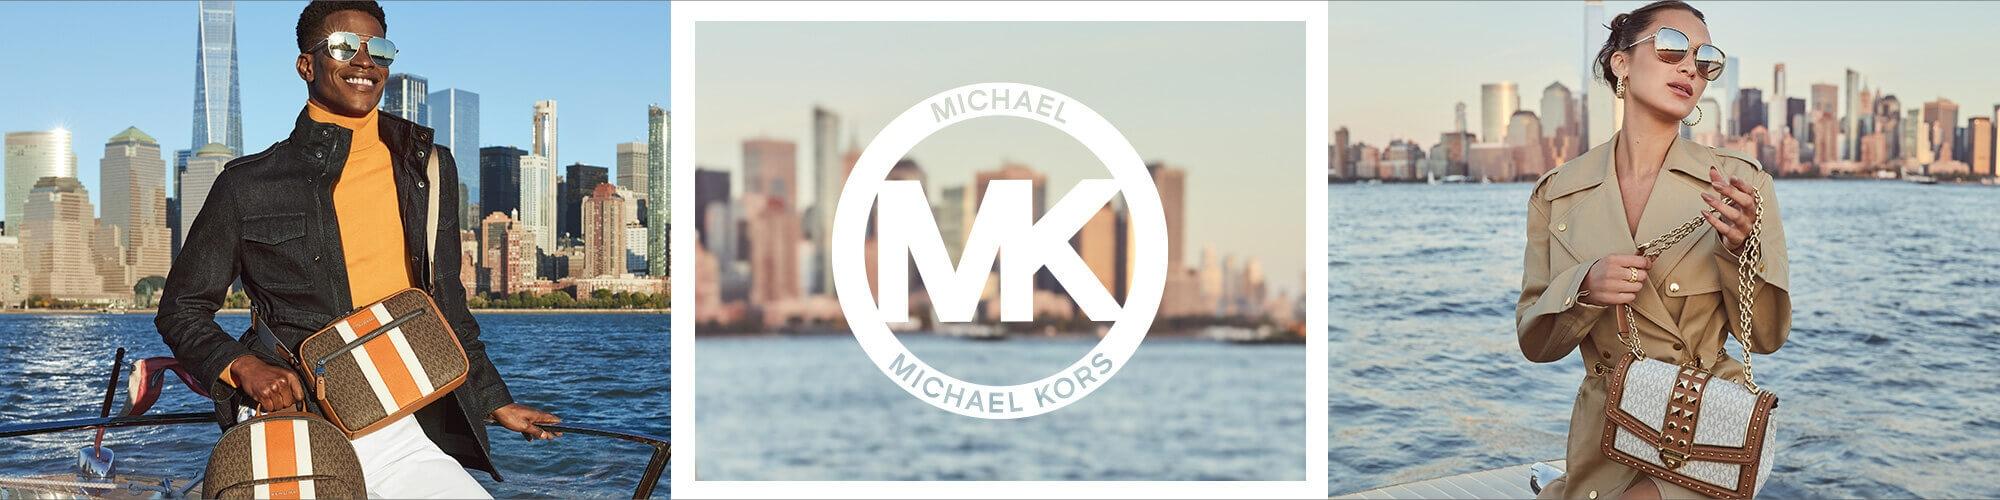 micheal by micheal kors